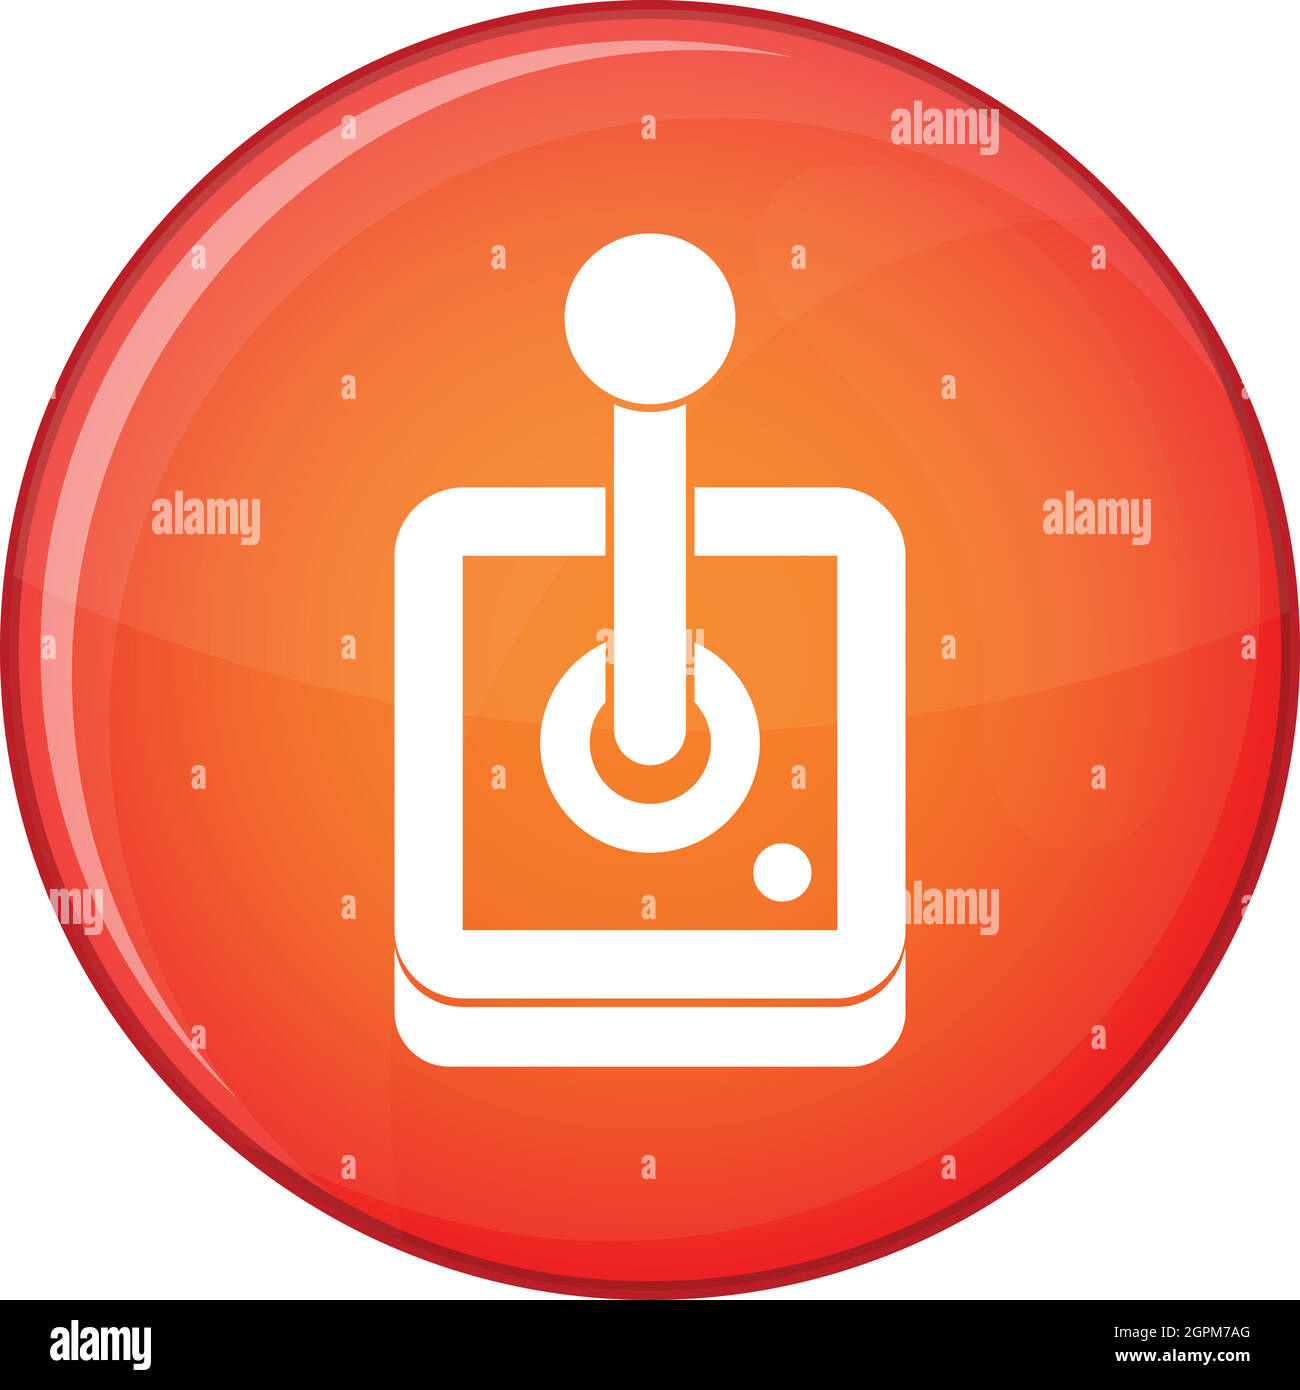 Joystick for computer games icon, flat style Stock Vector